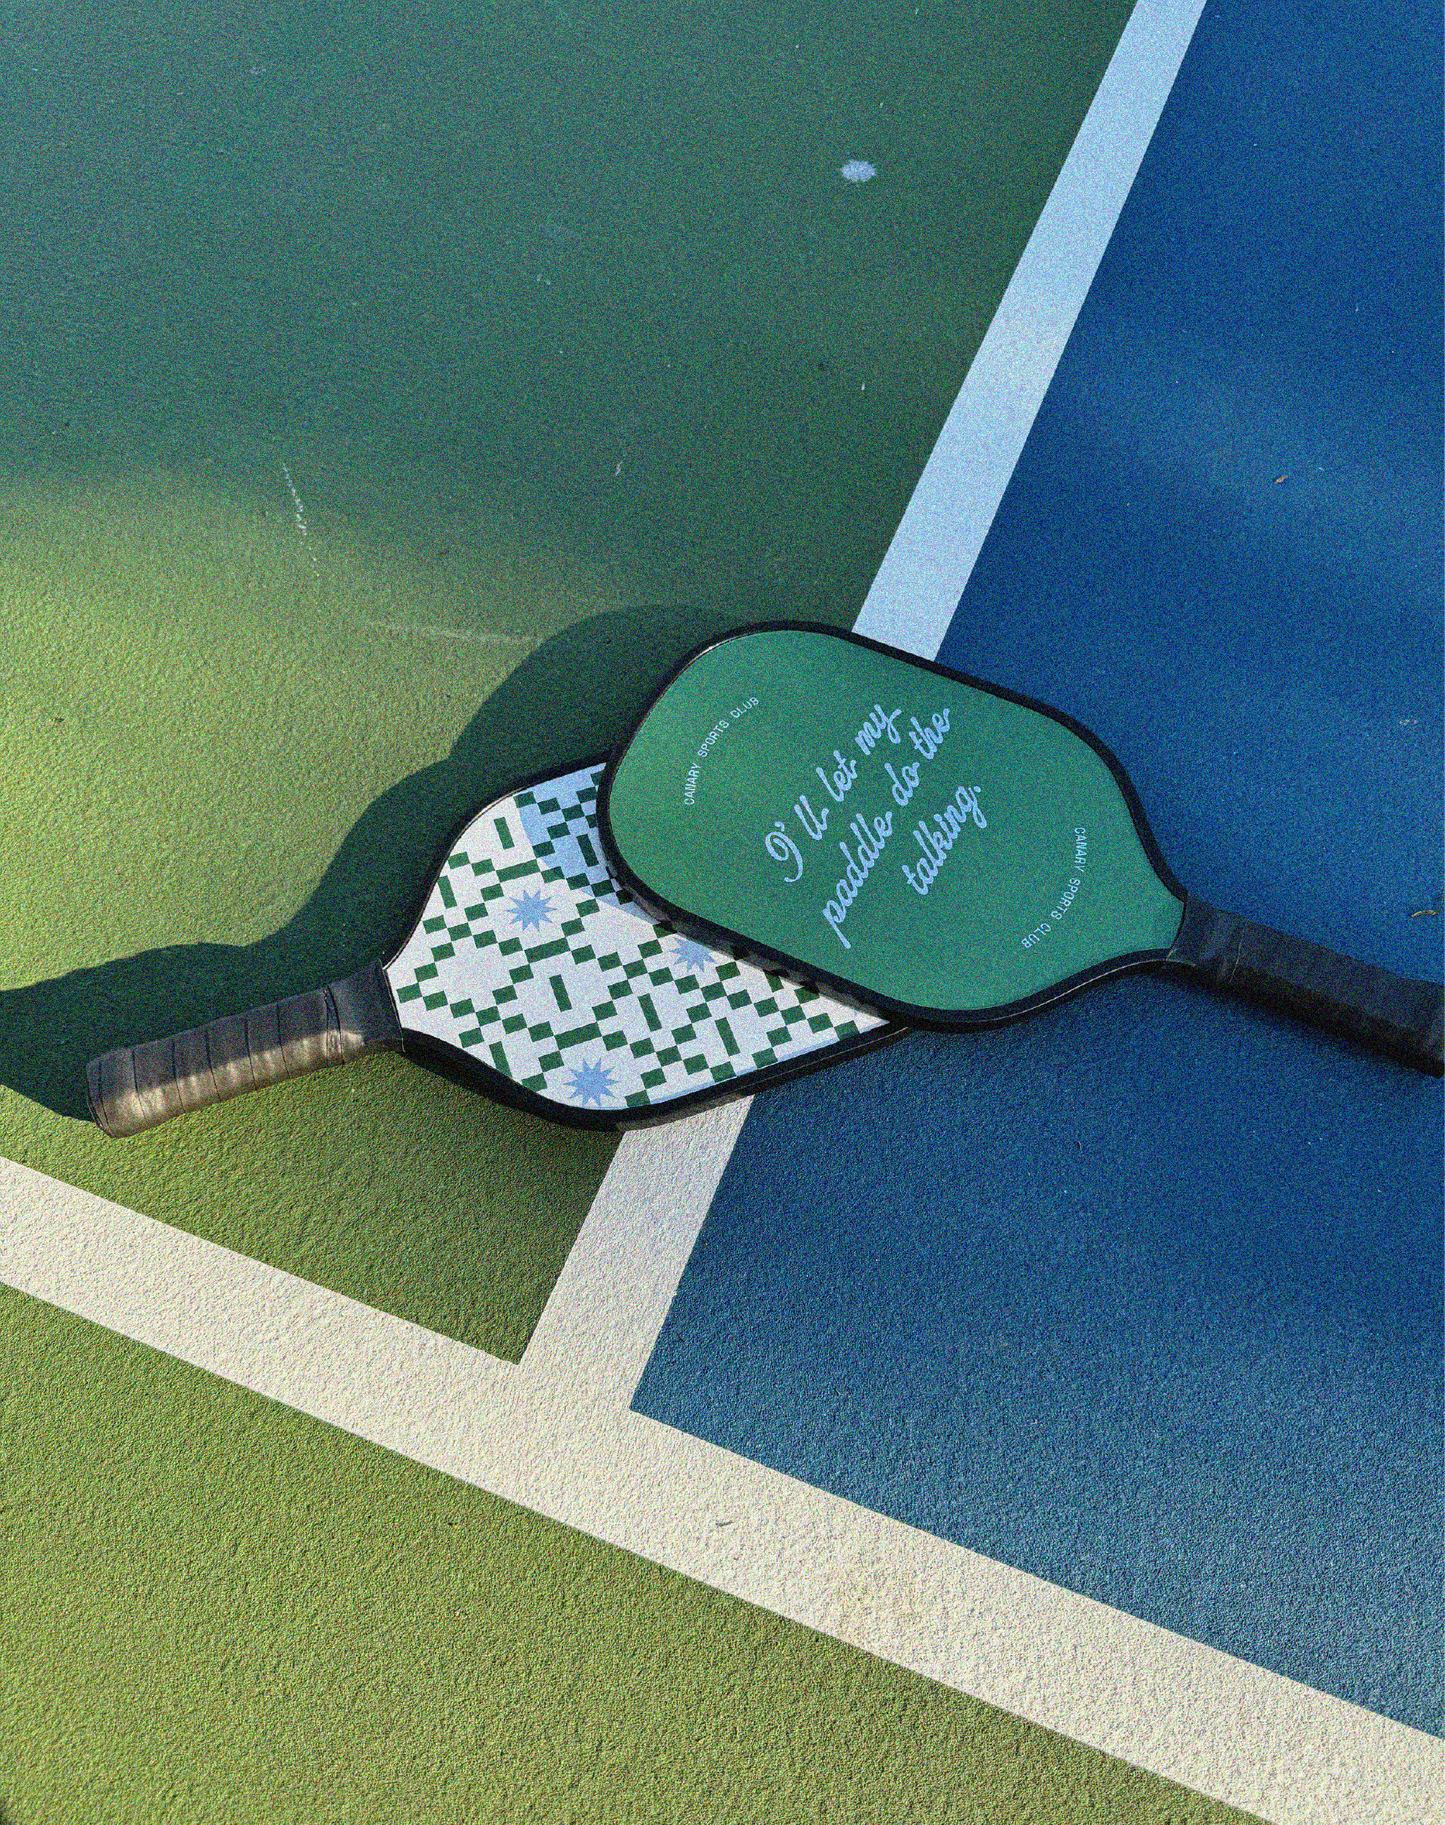 03. THE CANARY PICKLEBALL SET